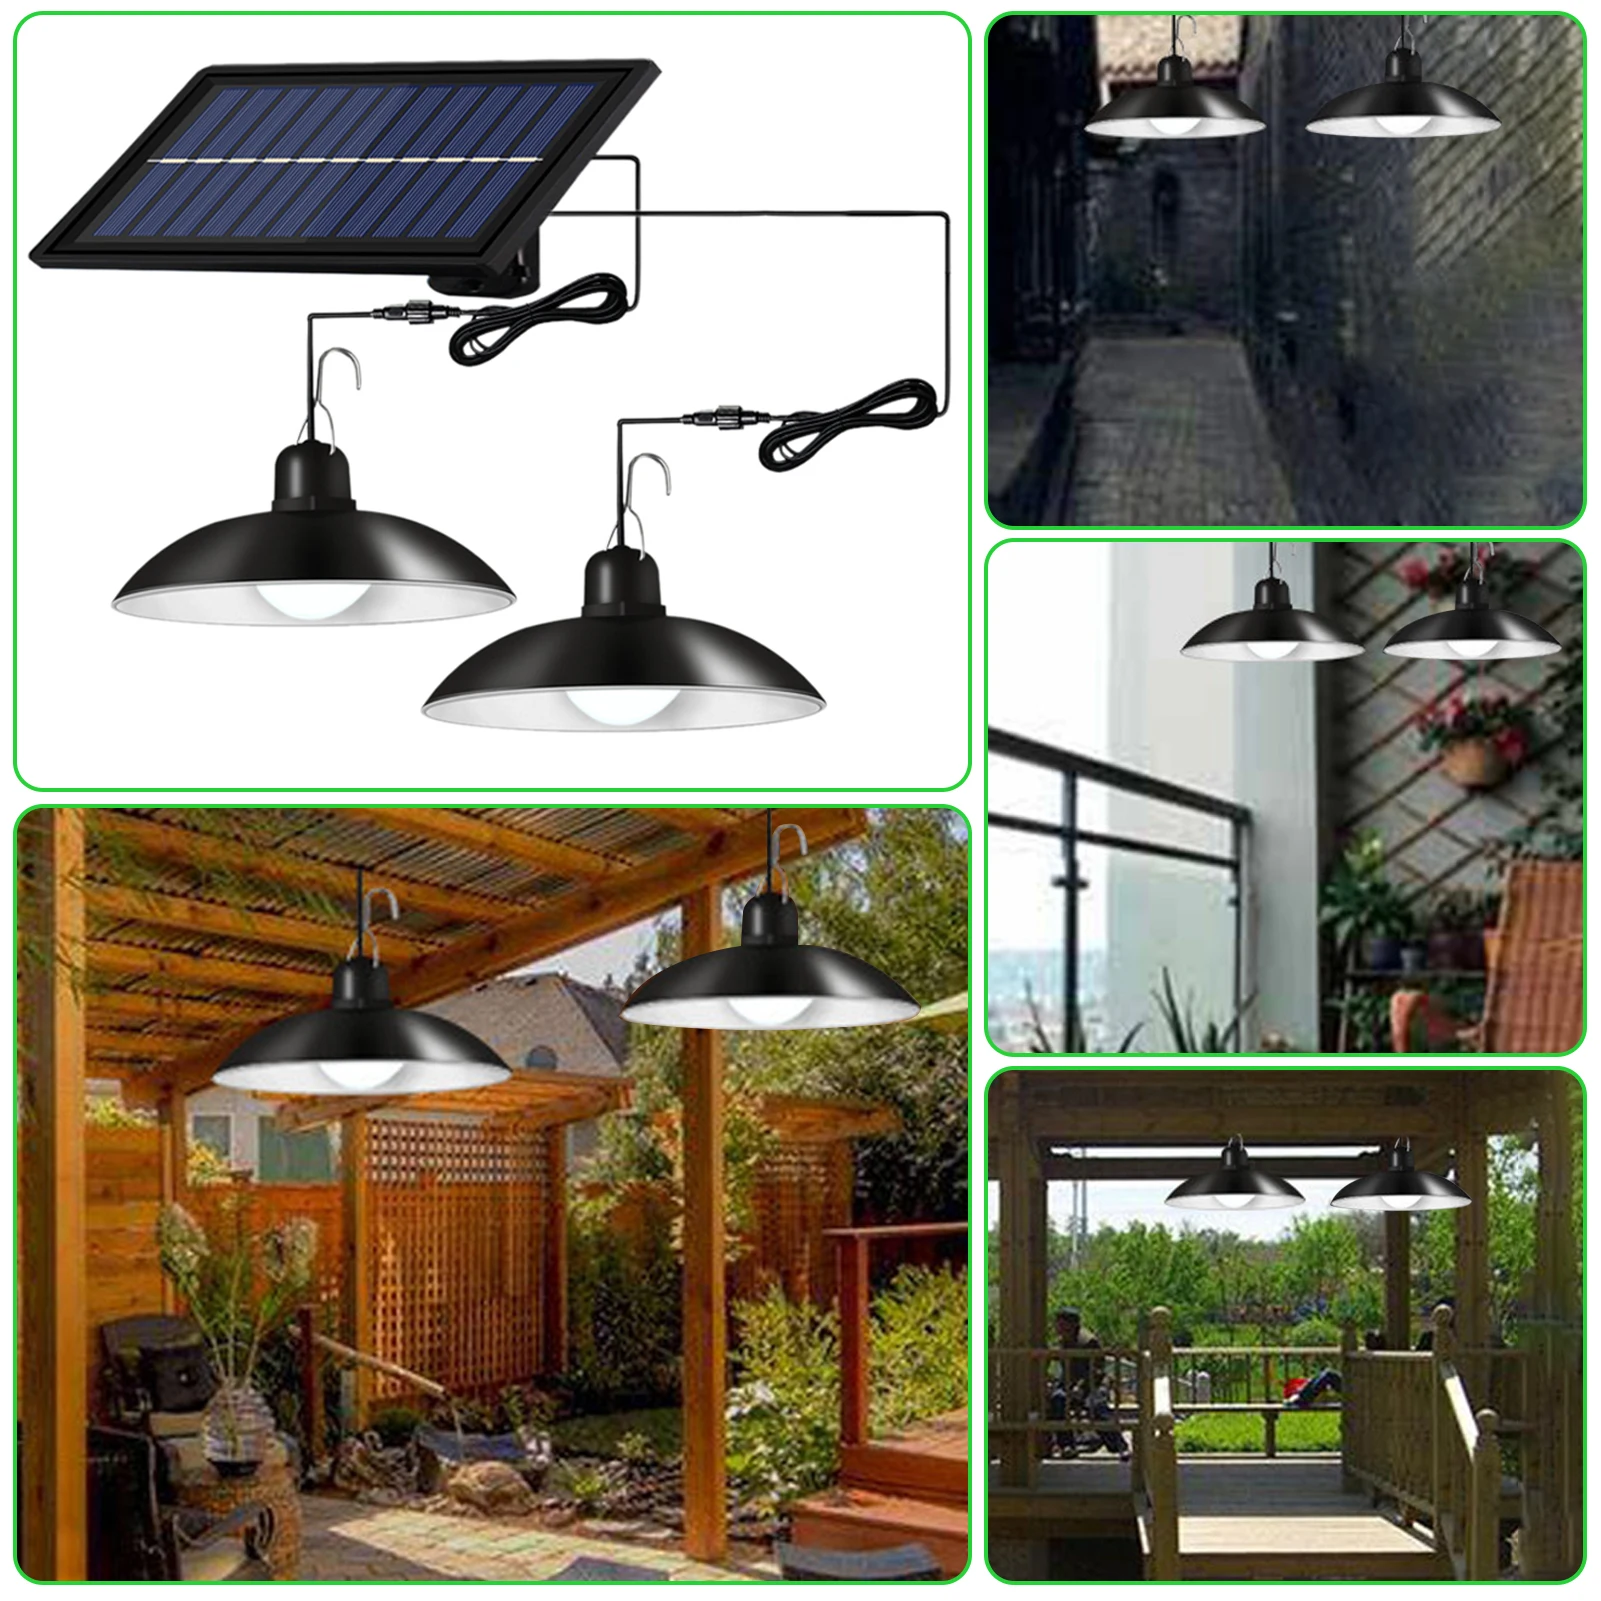 IP65 Double Head Solar Pendant Light Outdoor Indoor Solar Lamp With Line Warm White/White Lighting For Camping Garden Yard small solar lights